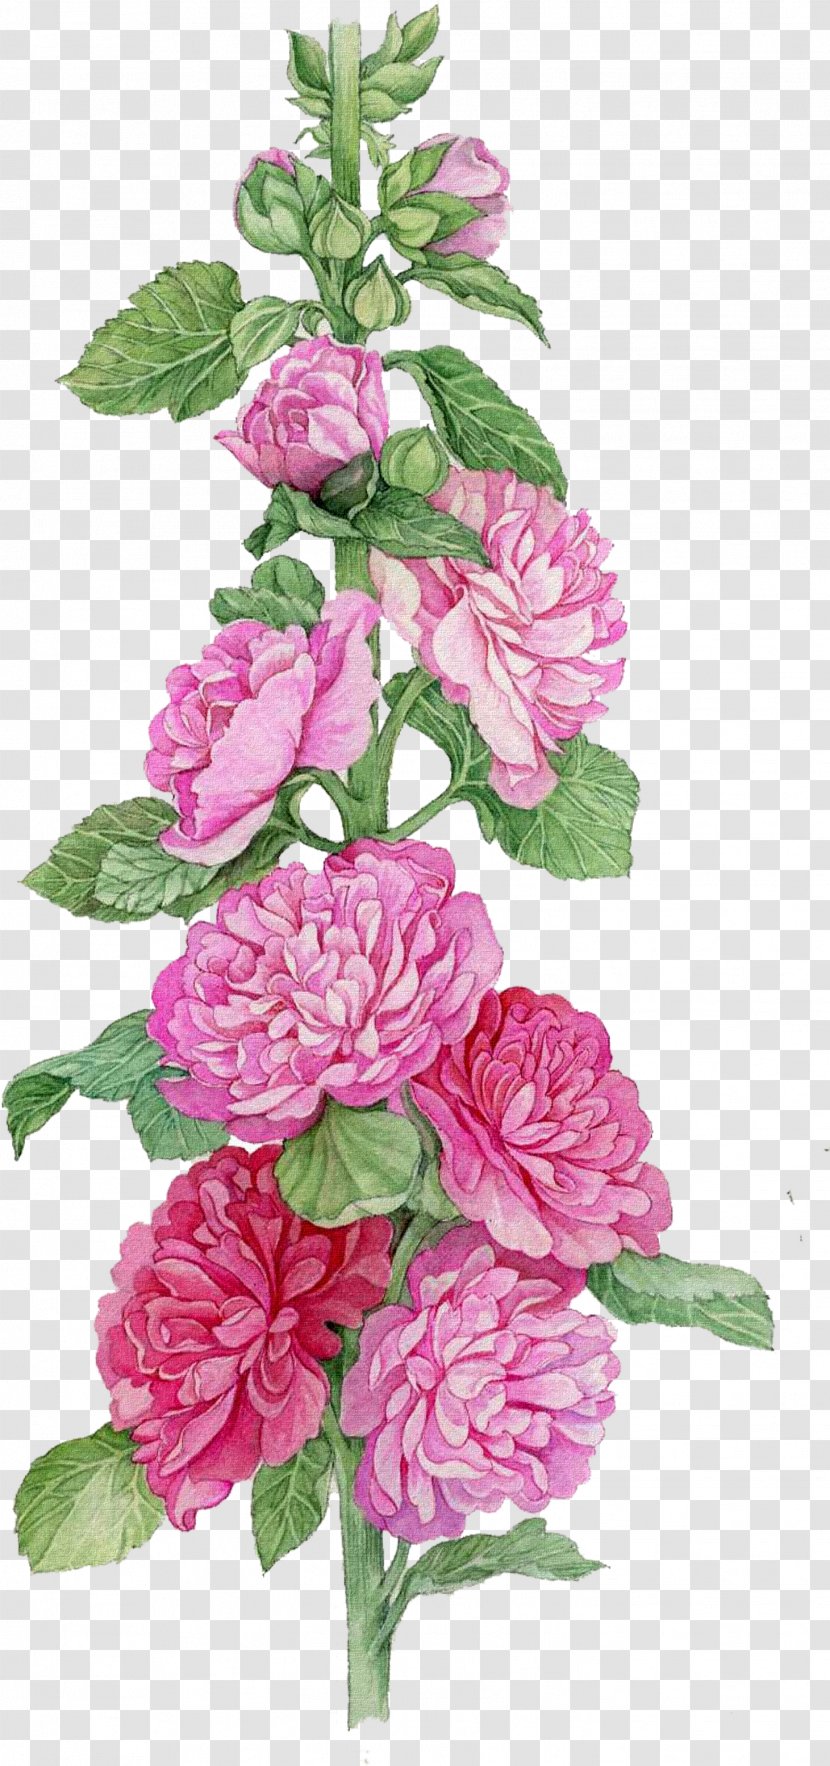 Watercolor Pink Flowers - Rosa Gallica - Hydrangea China Rose Transparent PNG